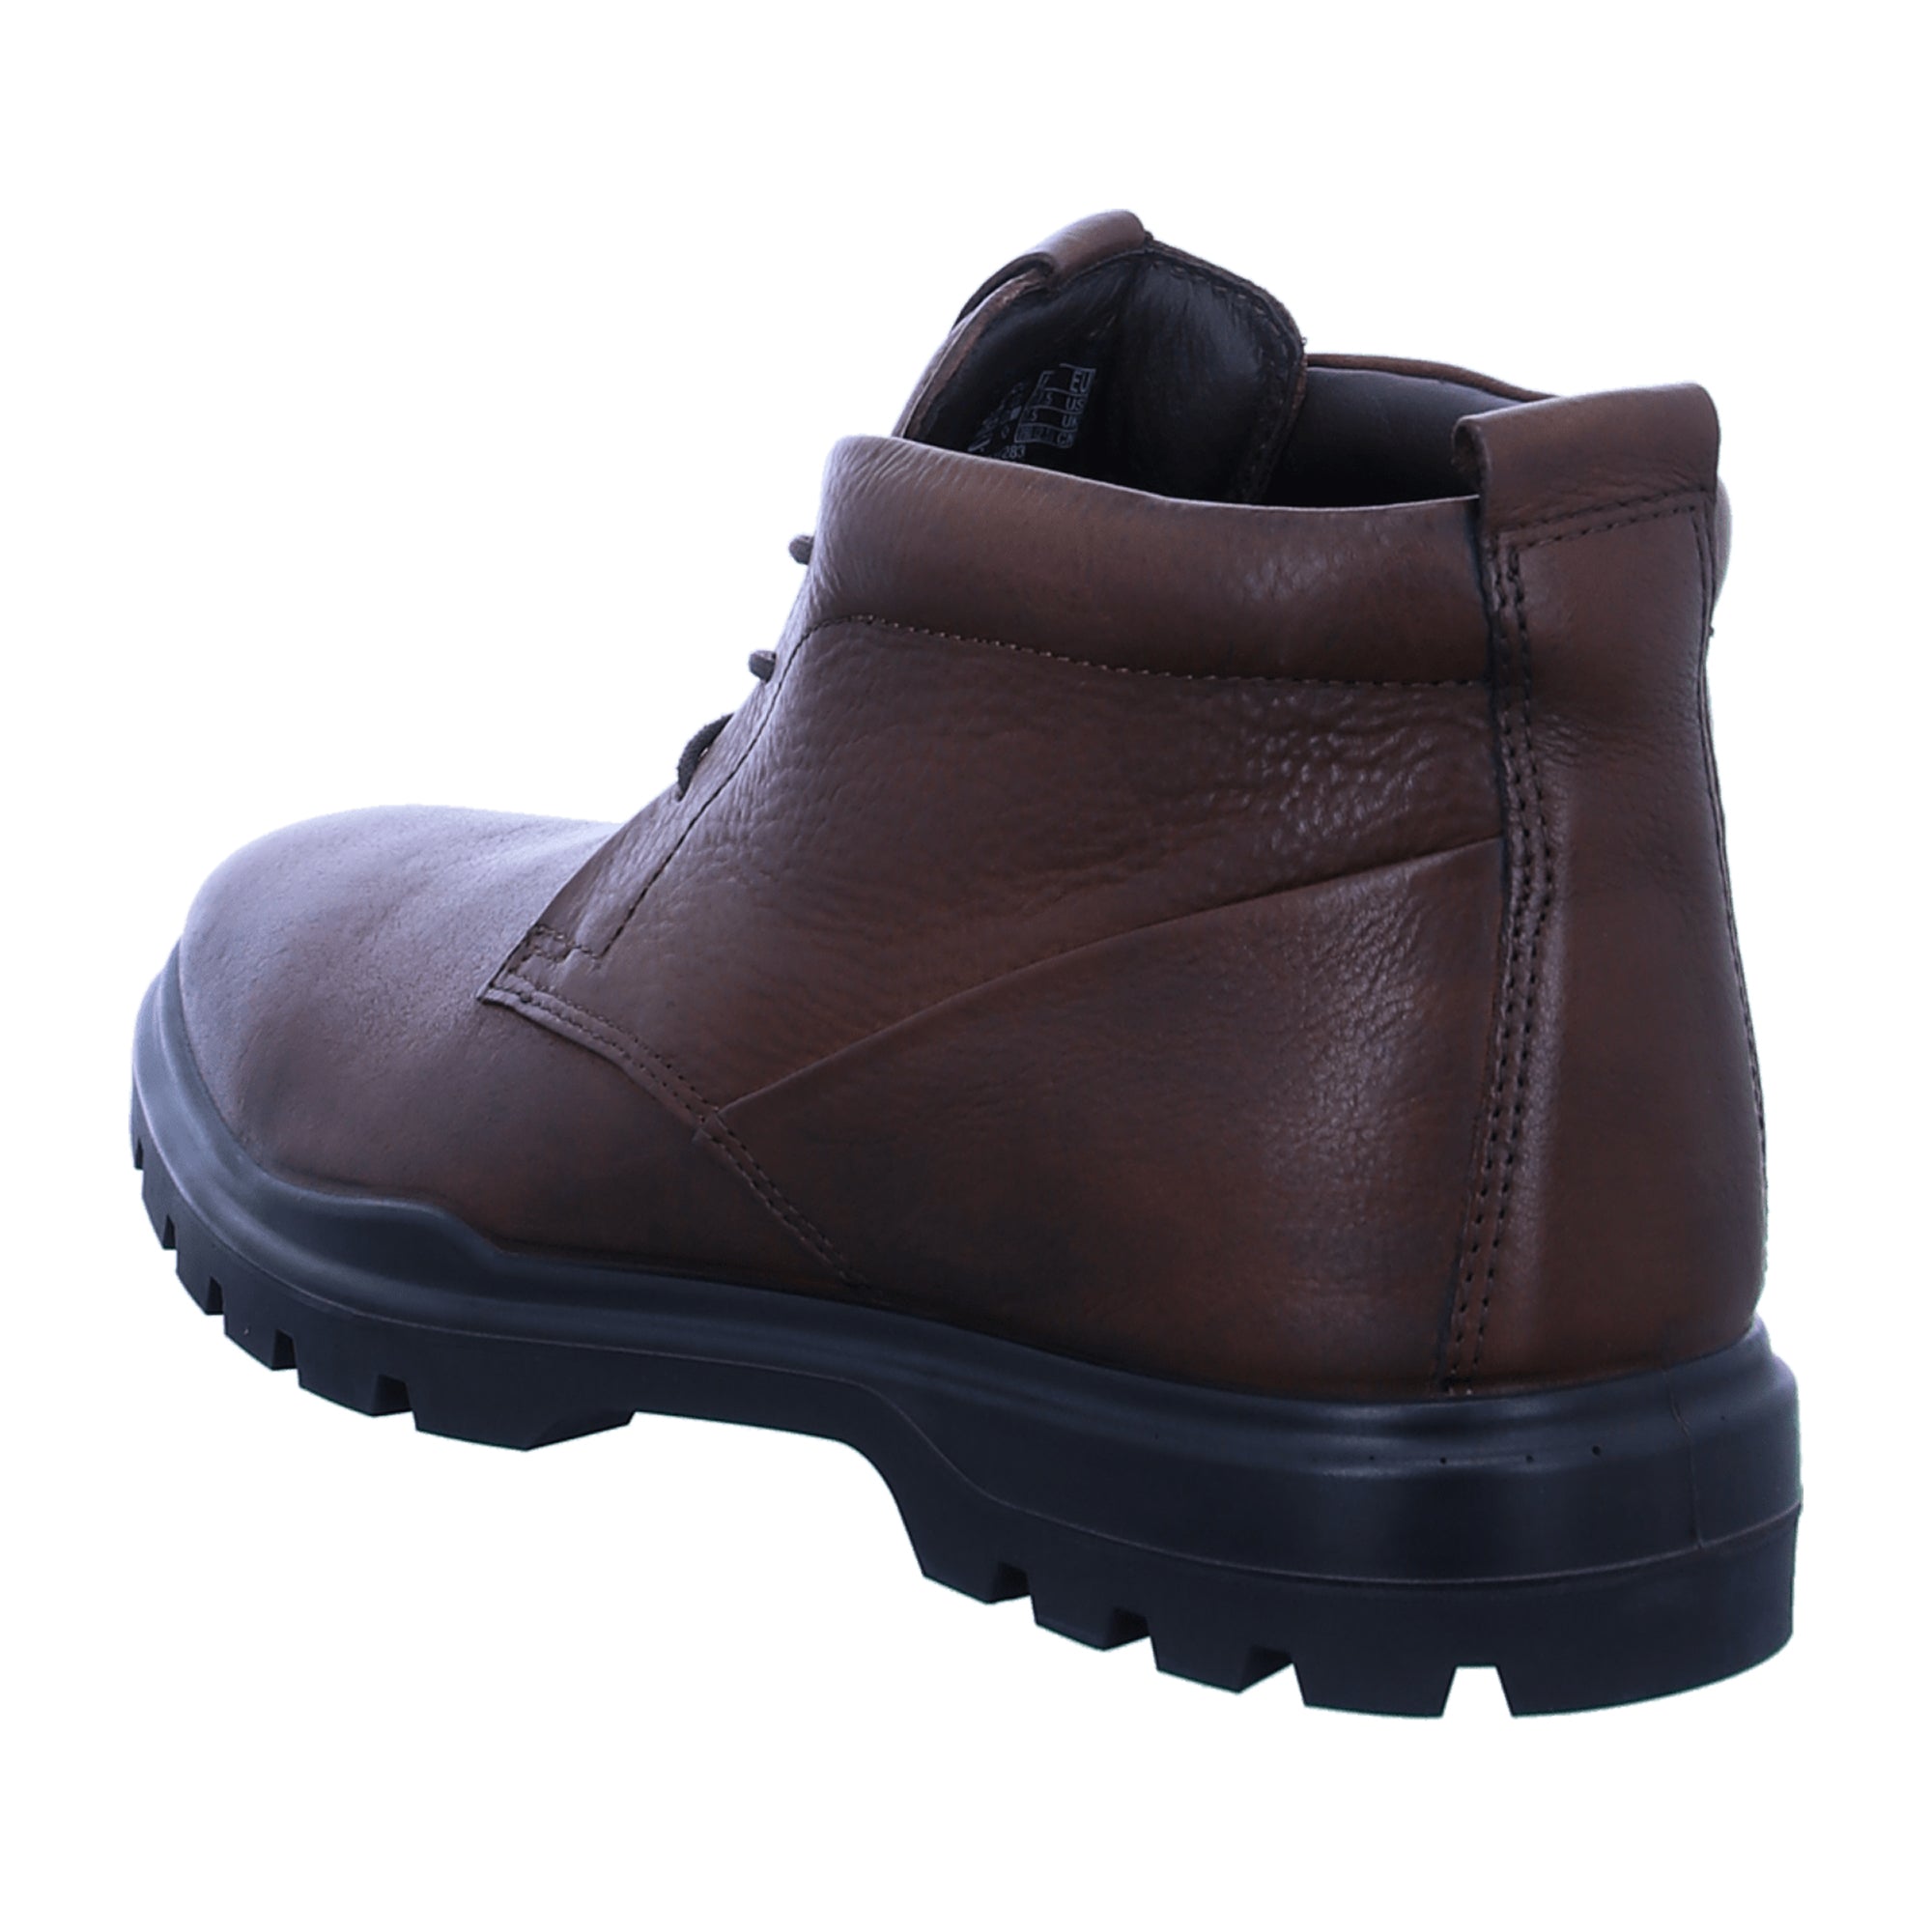 Ecco Men's Brown Leather Shoes | Stylish & Durable Footwear for Young Adults